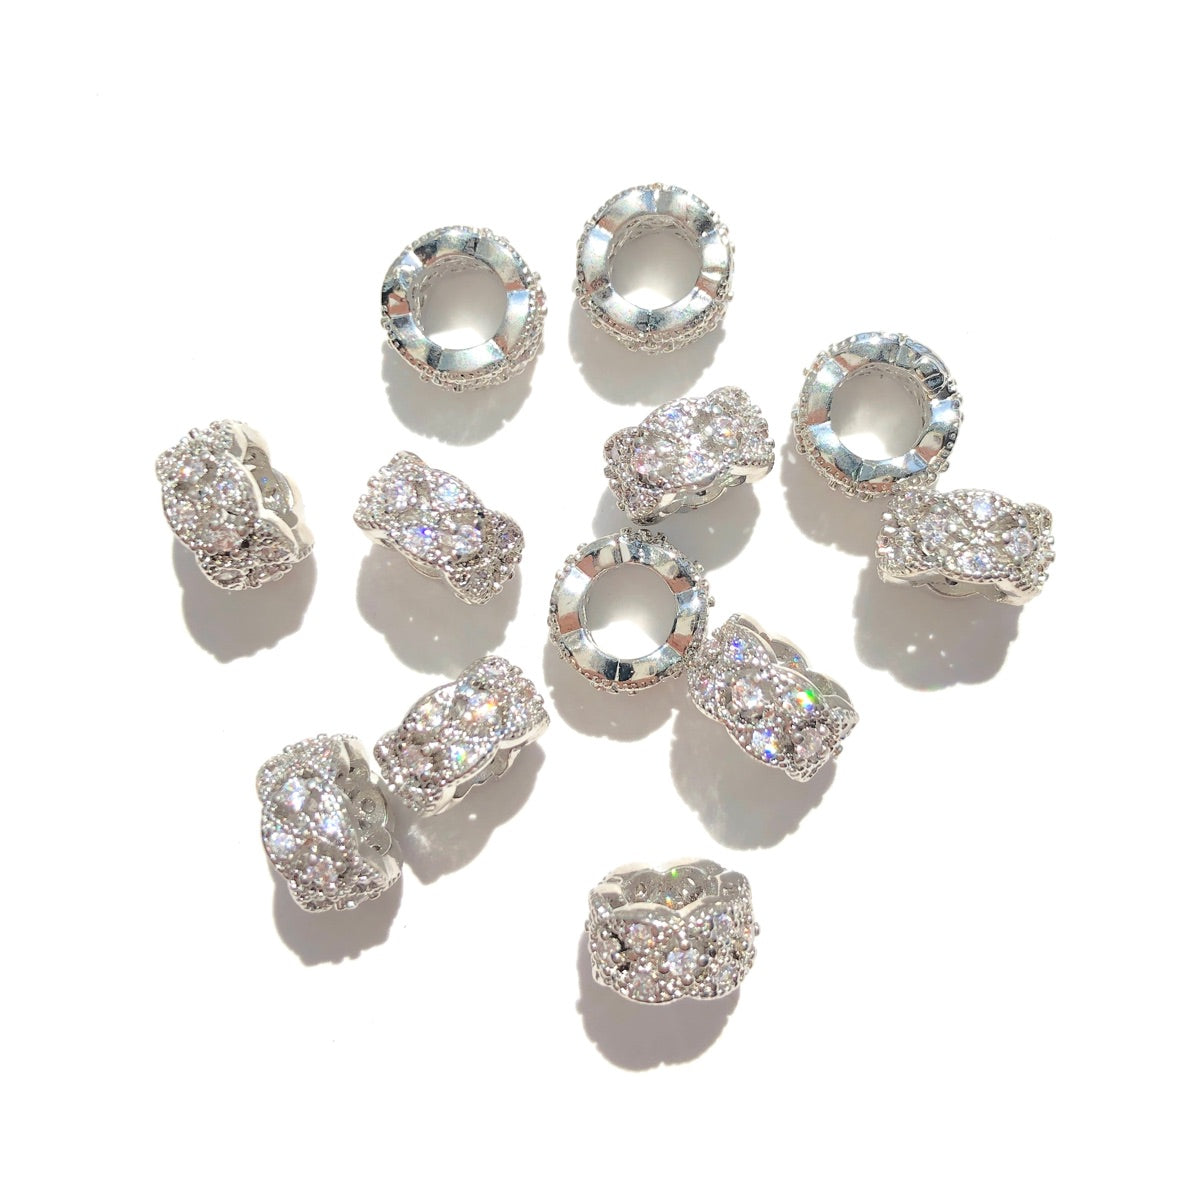 20-50pcs/lot 8mm CZ Paved Hollow Rondelle Wheel Spacers Silver CZ Paved Spacers New Spacers Arrivals Rondelle Beads Wholesale Charms Beads Beyond